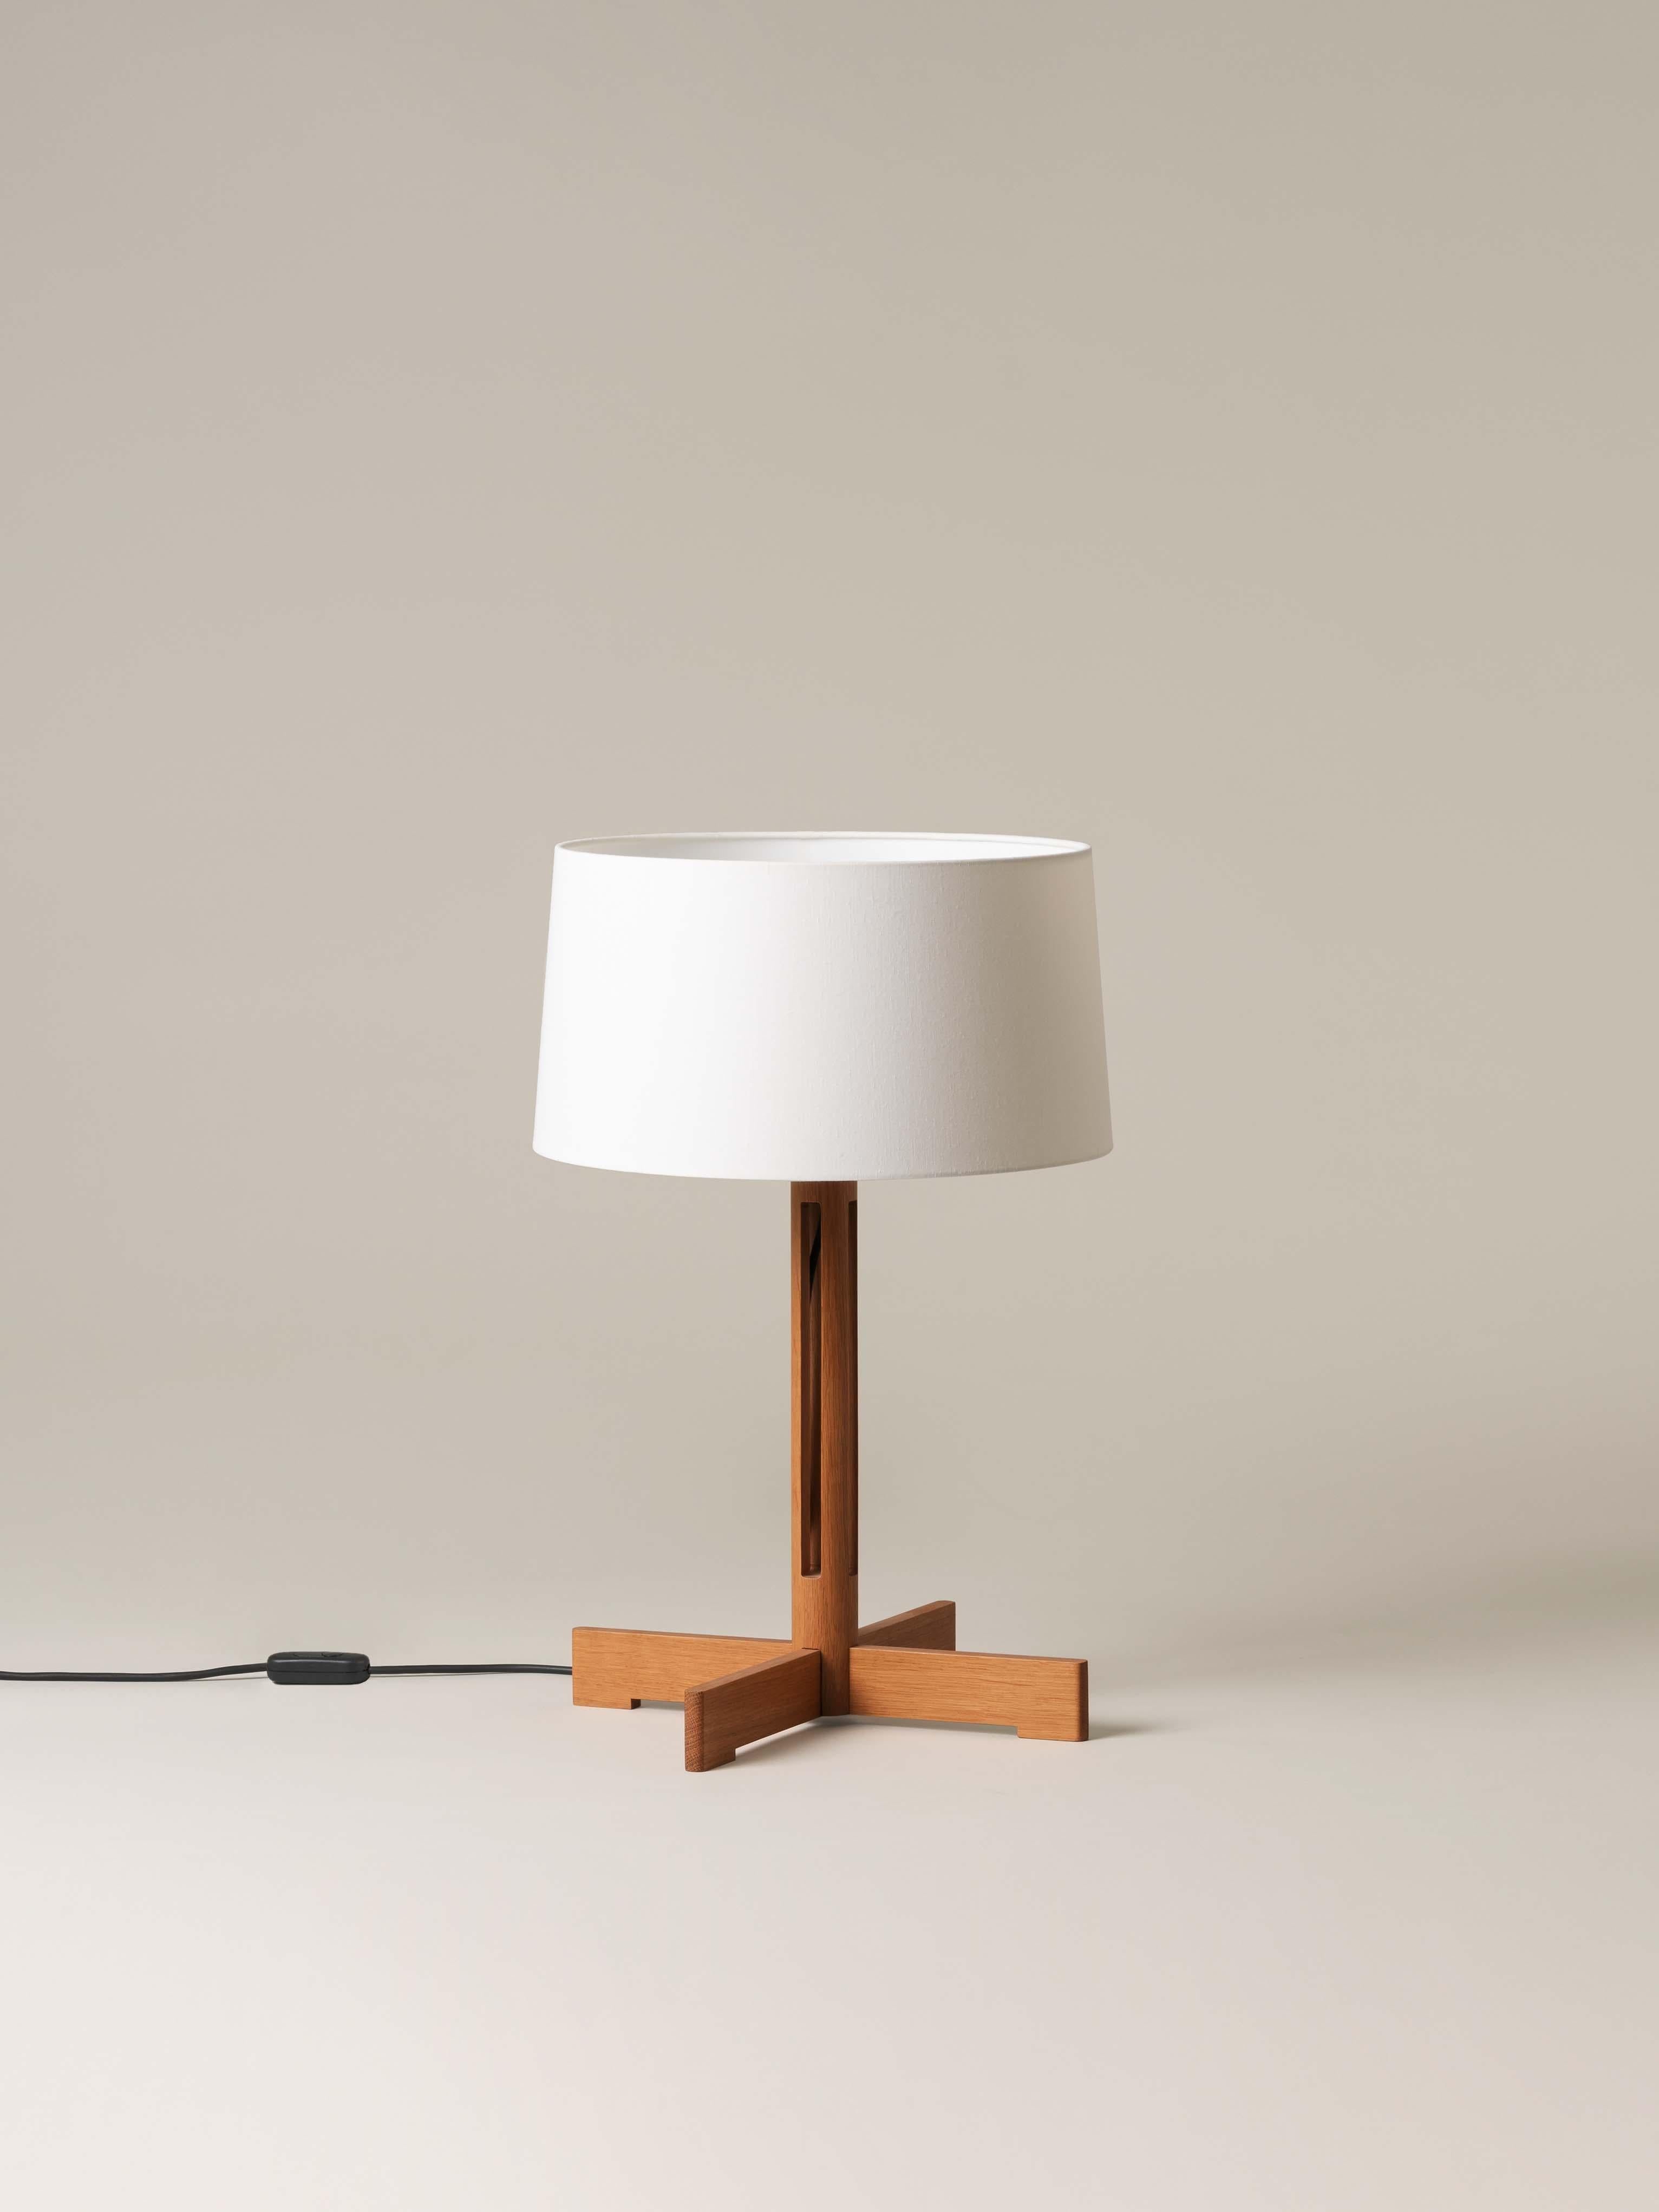 FAD table lamp by Miguel Milá
Dimensions: D 40 x H 61 cm
Materials: Linen, oak wood.

Miguel Milá got everything right compositionally with this demonstration of industrial craftsmanship. Its cylindrical oak column creates a vertical symmetry